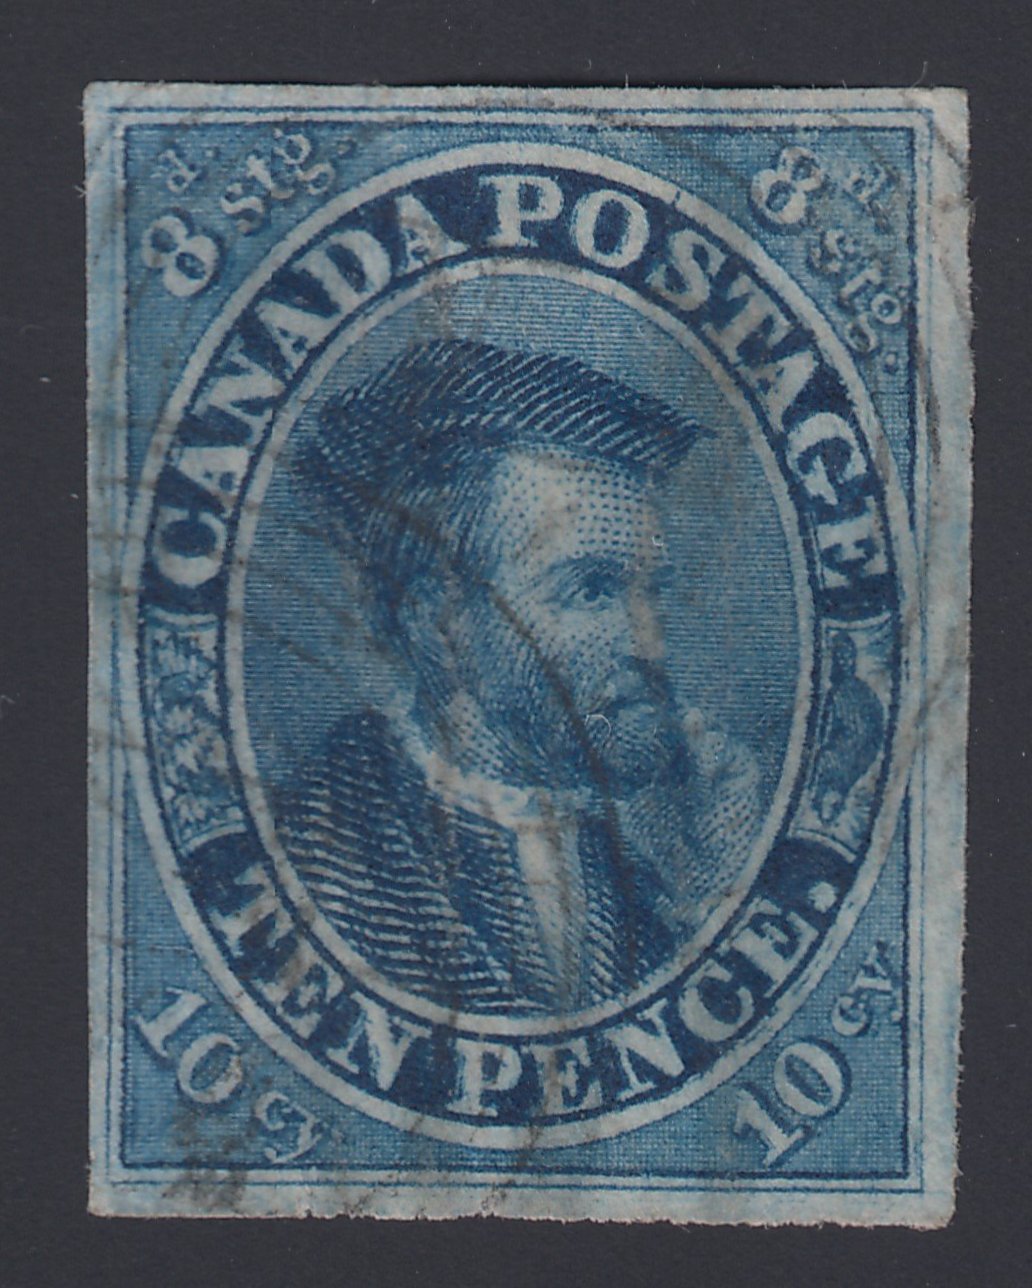 0007CA1808 - Canada #7iv - Used Strong Re-Entry